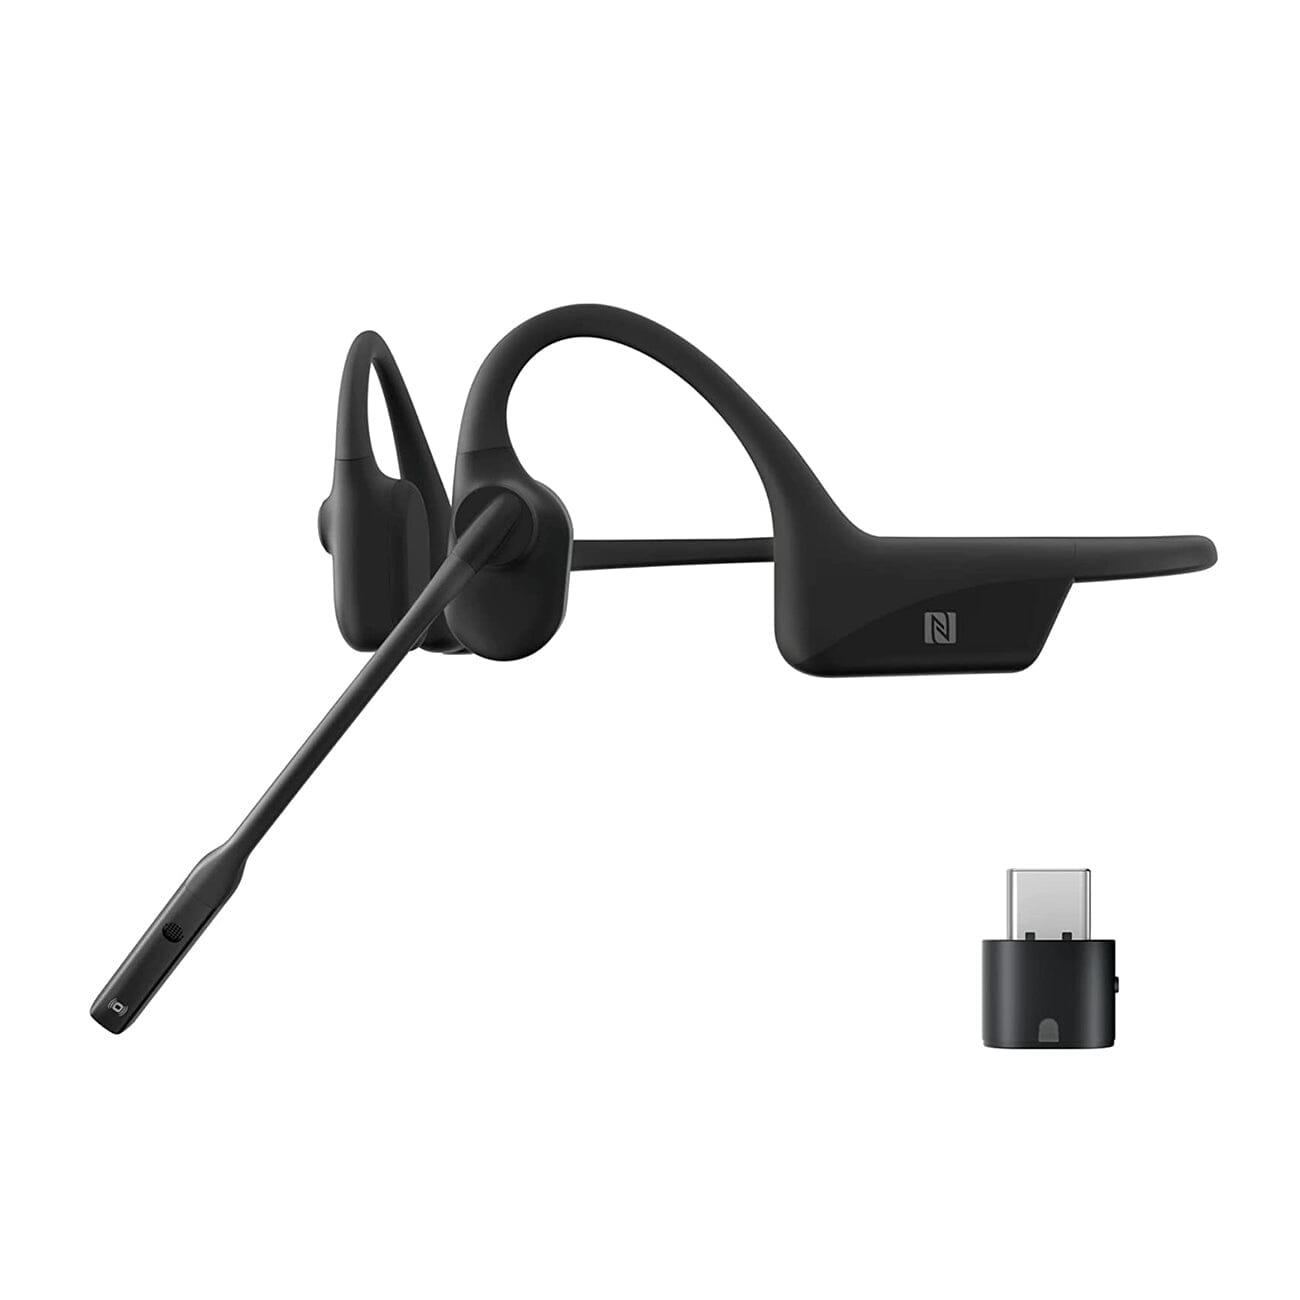 SHOKZ OpenComm UC Type C - Bluetooth Stereo Computer Headset - Bone Conduction Wireless PC Headphones with Noise-Canceling Boom Microphone for Home Office Business Commercial Use, with Bookmark SHOKZ Black 